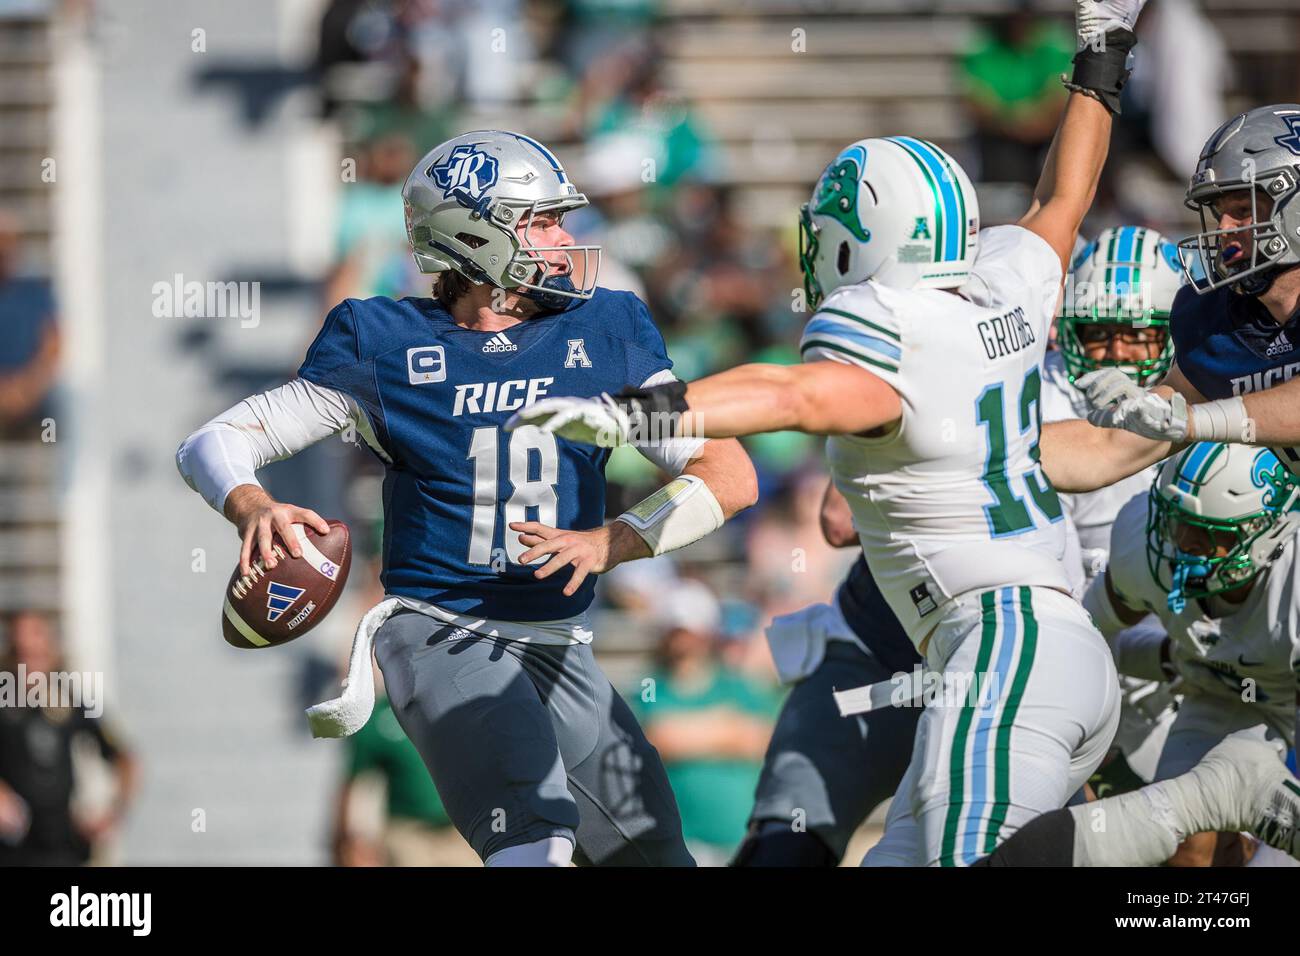 Houston, Texas, USA. 28th Oct, 2023. Rice Owls quarterback JT Daniels (18) is pressured by Tulane Green Wave line backer Tyler Grubbs (13) during the NCAA football game between the Tulane Green Wave and the Rice Owls at Rice Stadium in Houston, Texas. Tulane defeated Rice 30-28. Prentice C. James/CSM/Alamy Live News Stock Photo